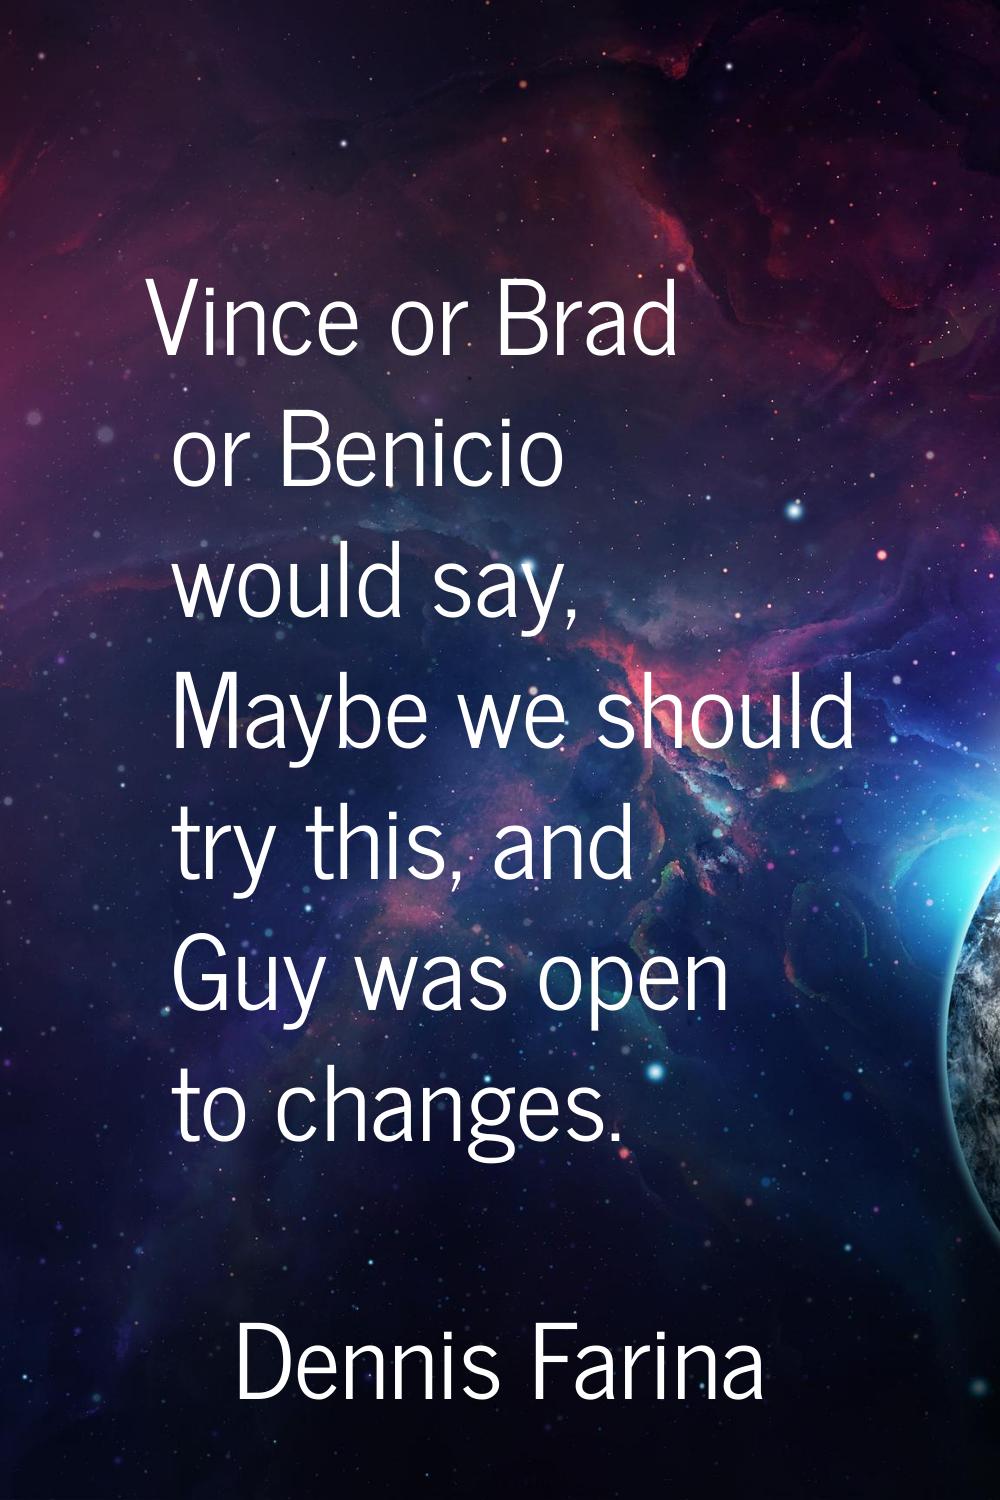 Vince or Brad or Benicio would say, Maybe we should try this, and Guy was open to changes.